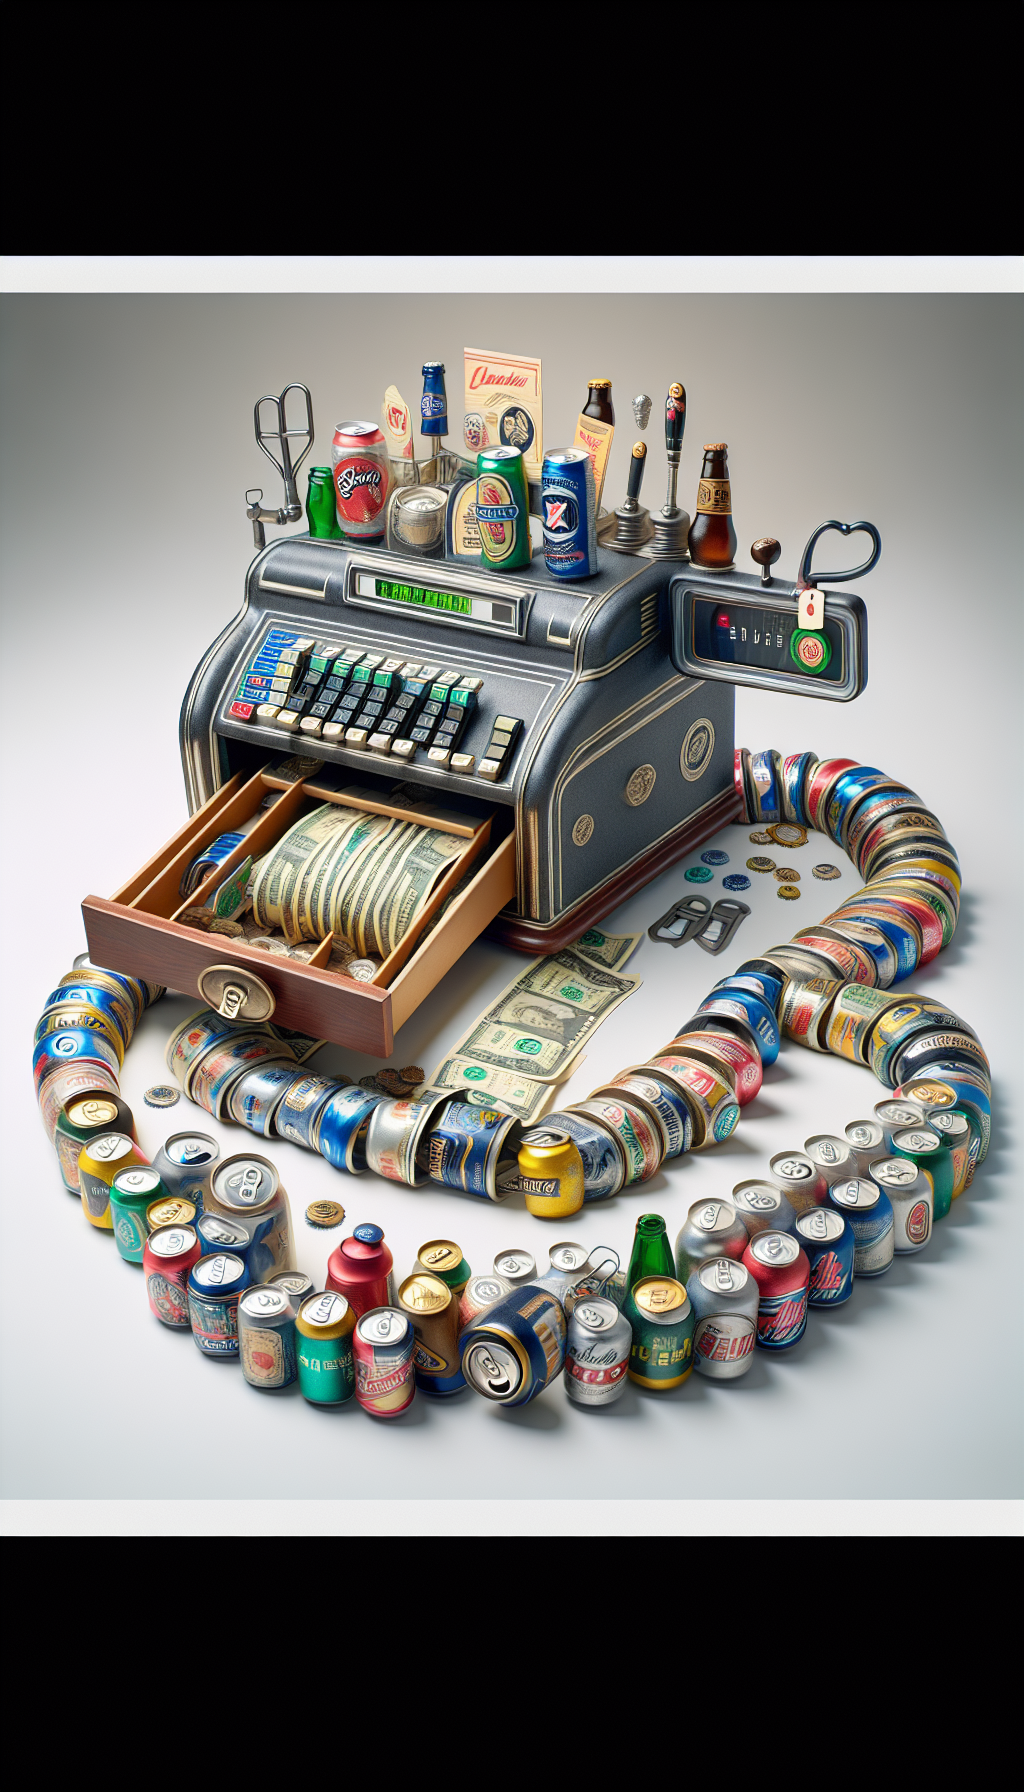 A whimsical vintage cash register sits at the center, its drawer popped open revealing various classic beer cans as currency, with price tags indicating their value. The register screen displays a growing total. Surrounding the register, a scattering of old beer memorabilia—labels, bottle caps, and openers—merges into a flowing ribbon, symbolizing the flow of income from these collectibles.